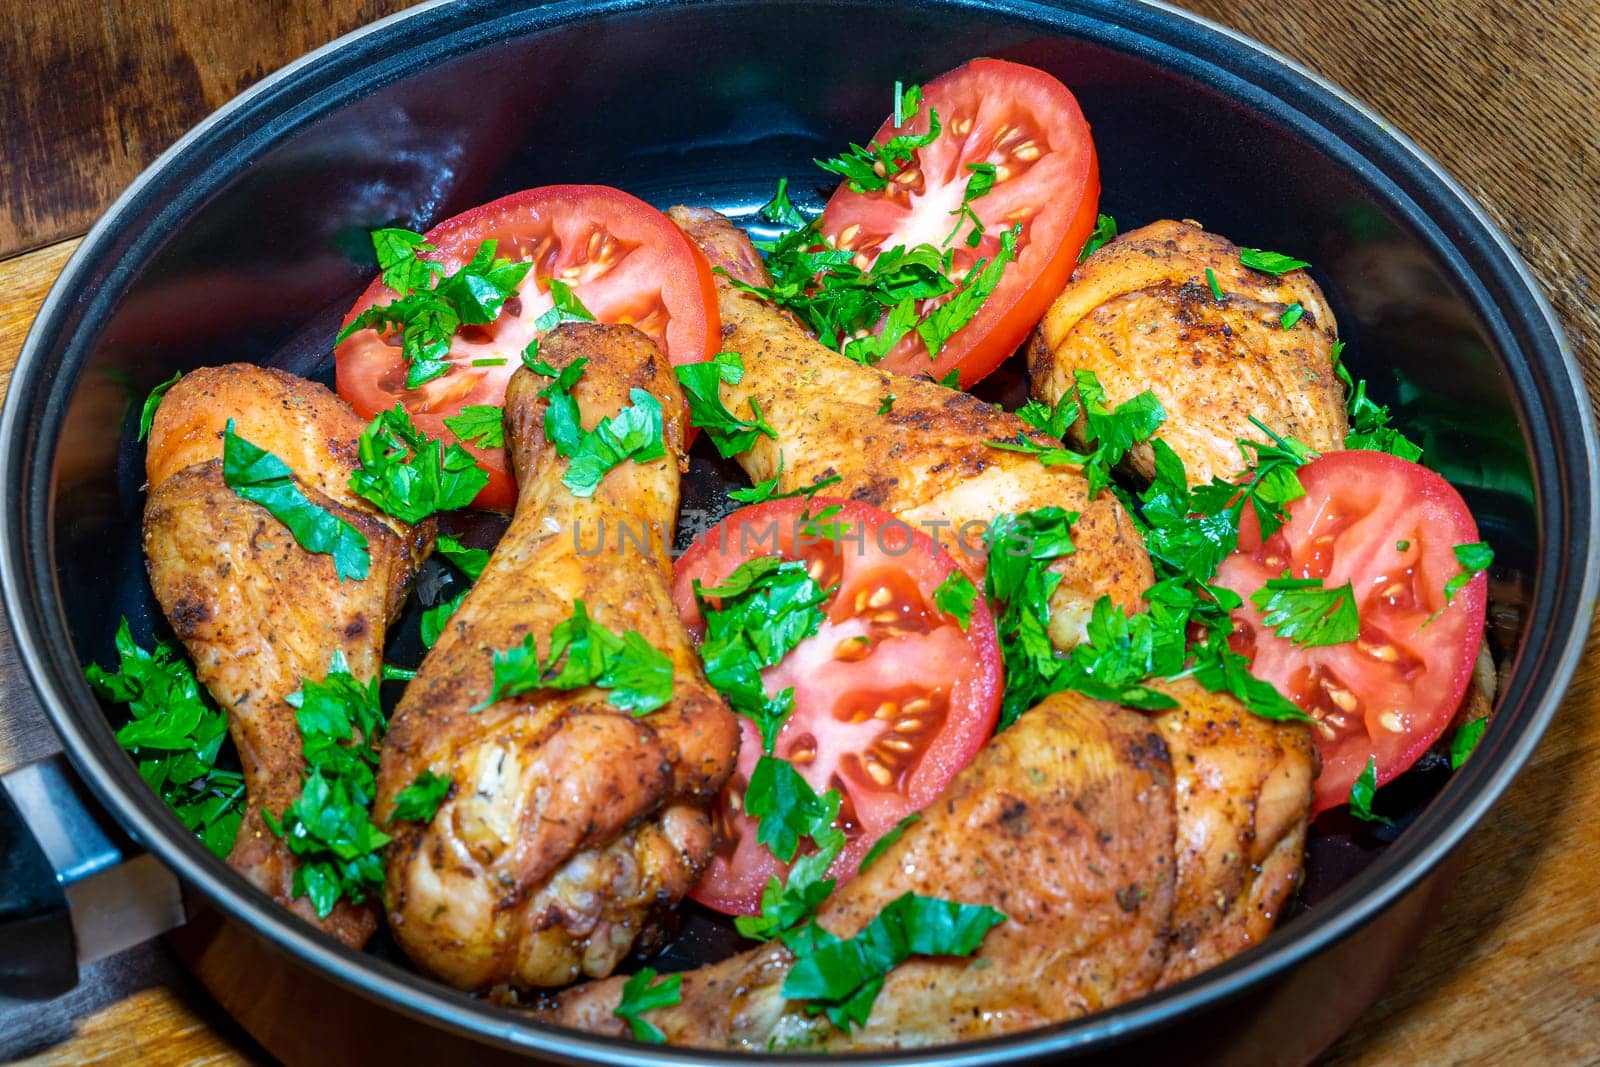 Baked chicken legs with tomatoes and herbs in a pan.